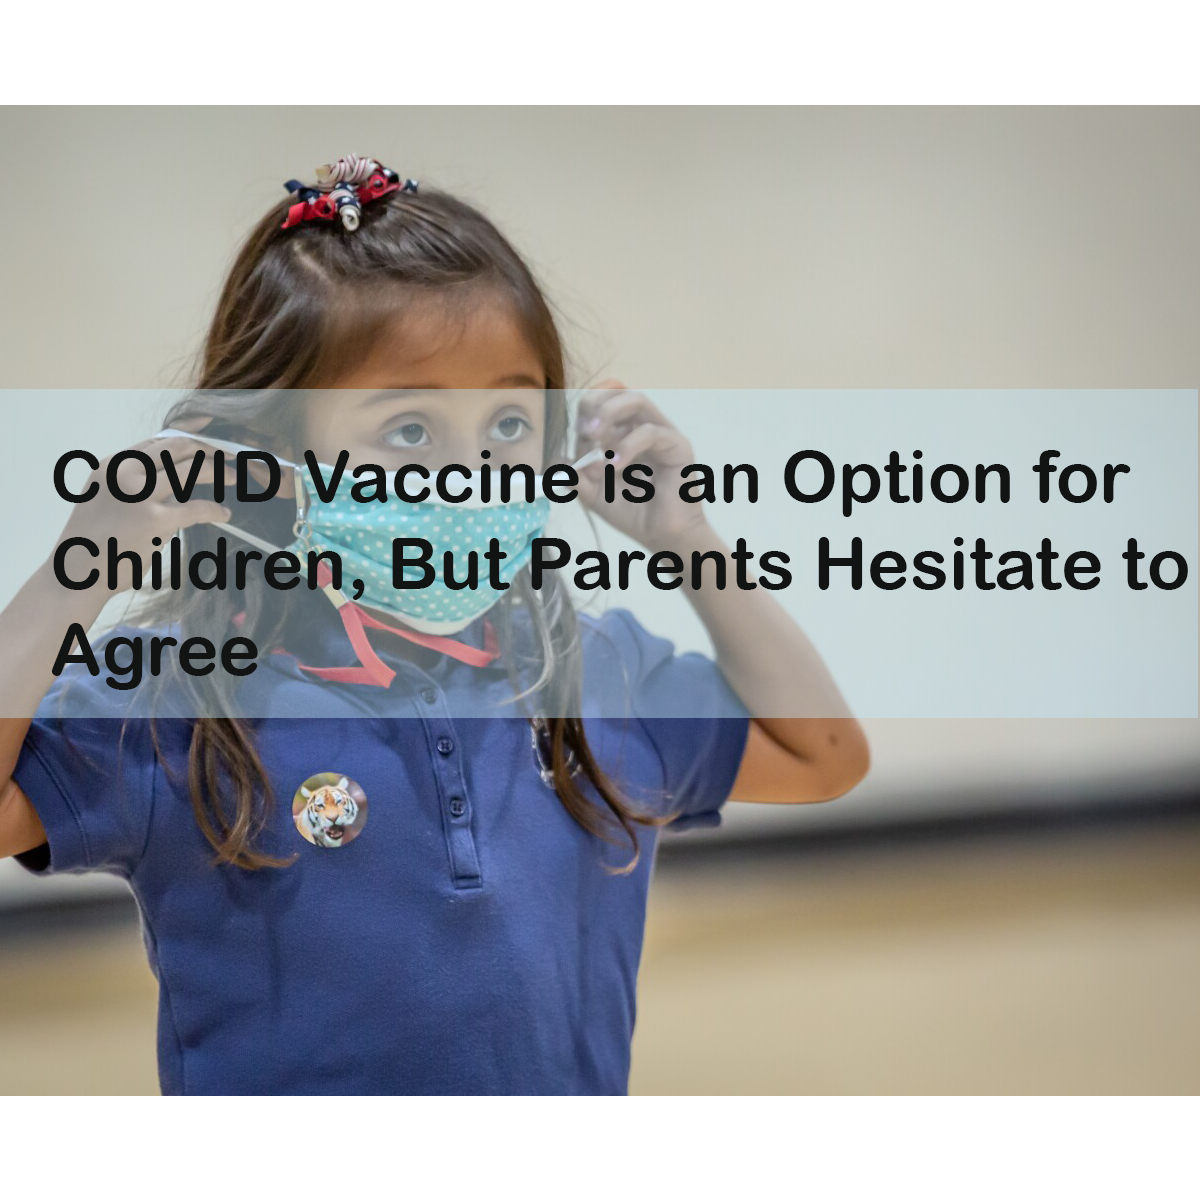 COVID Vaccine is an Option for Children, But Parents Hesitate to Agree